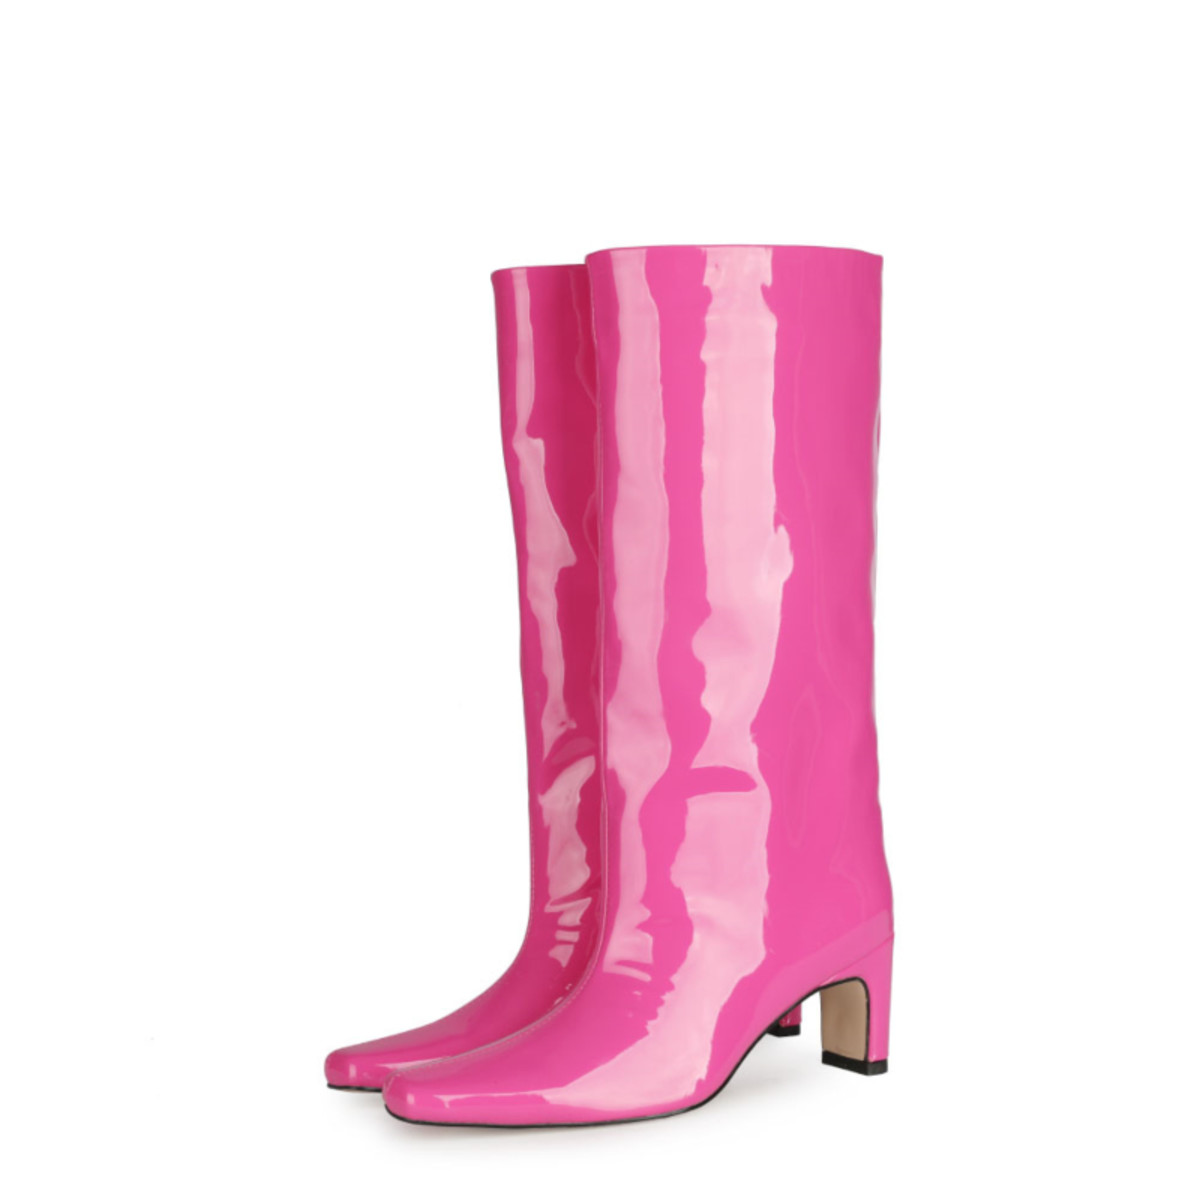 up2step wide calf boot